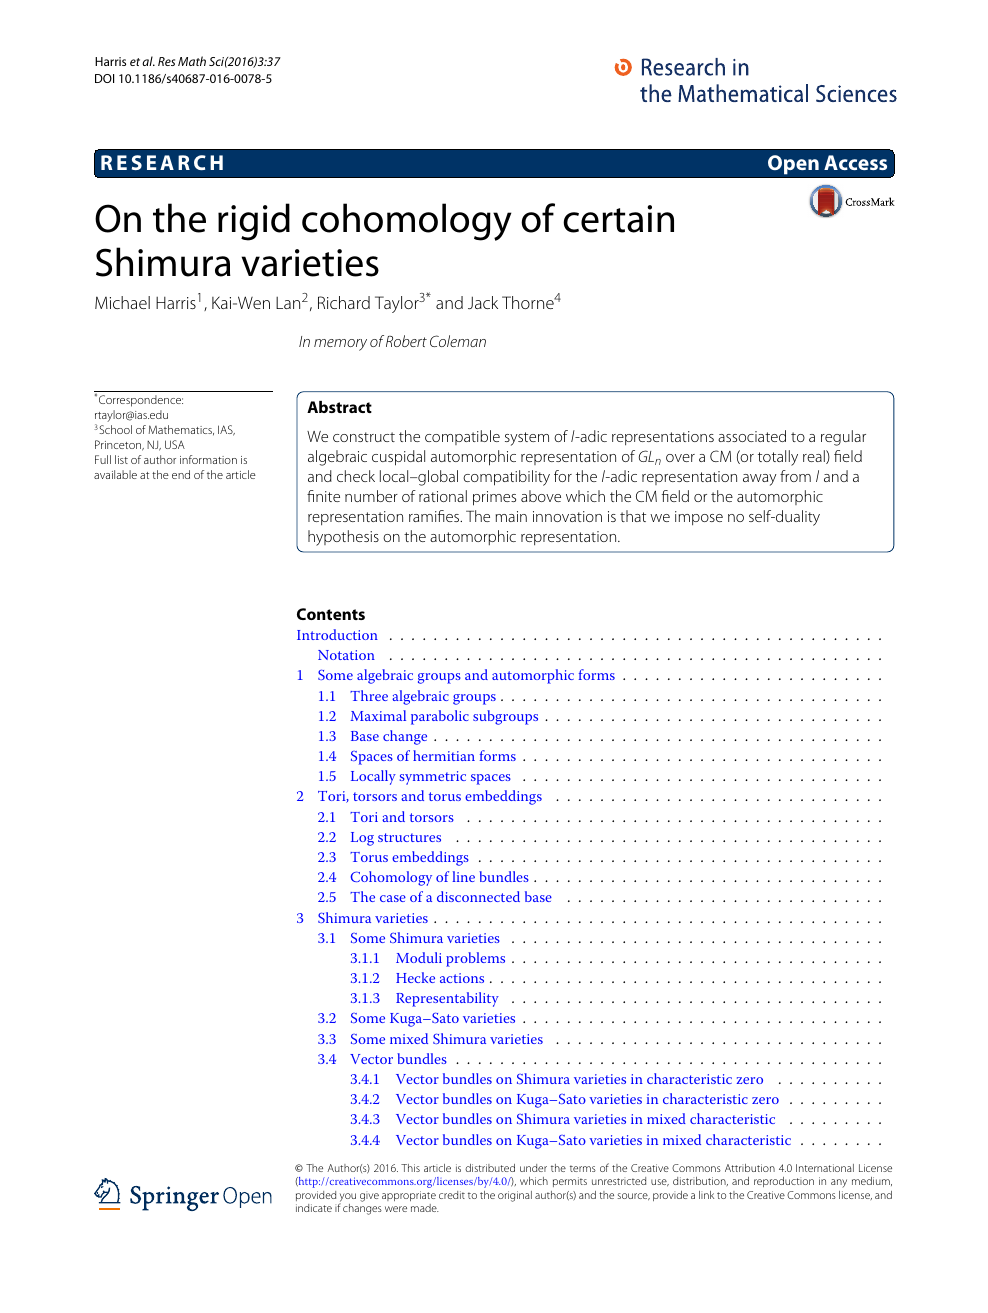 On The Rigid Cohomology Of Certain Shimura Varieties Topic Of Research Paper In Mathematics Download Scholarly Article Pdf And Read For Free On Cyberleninka Open Science Hub